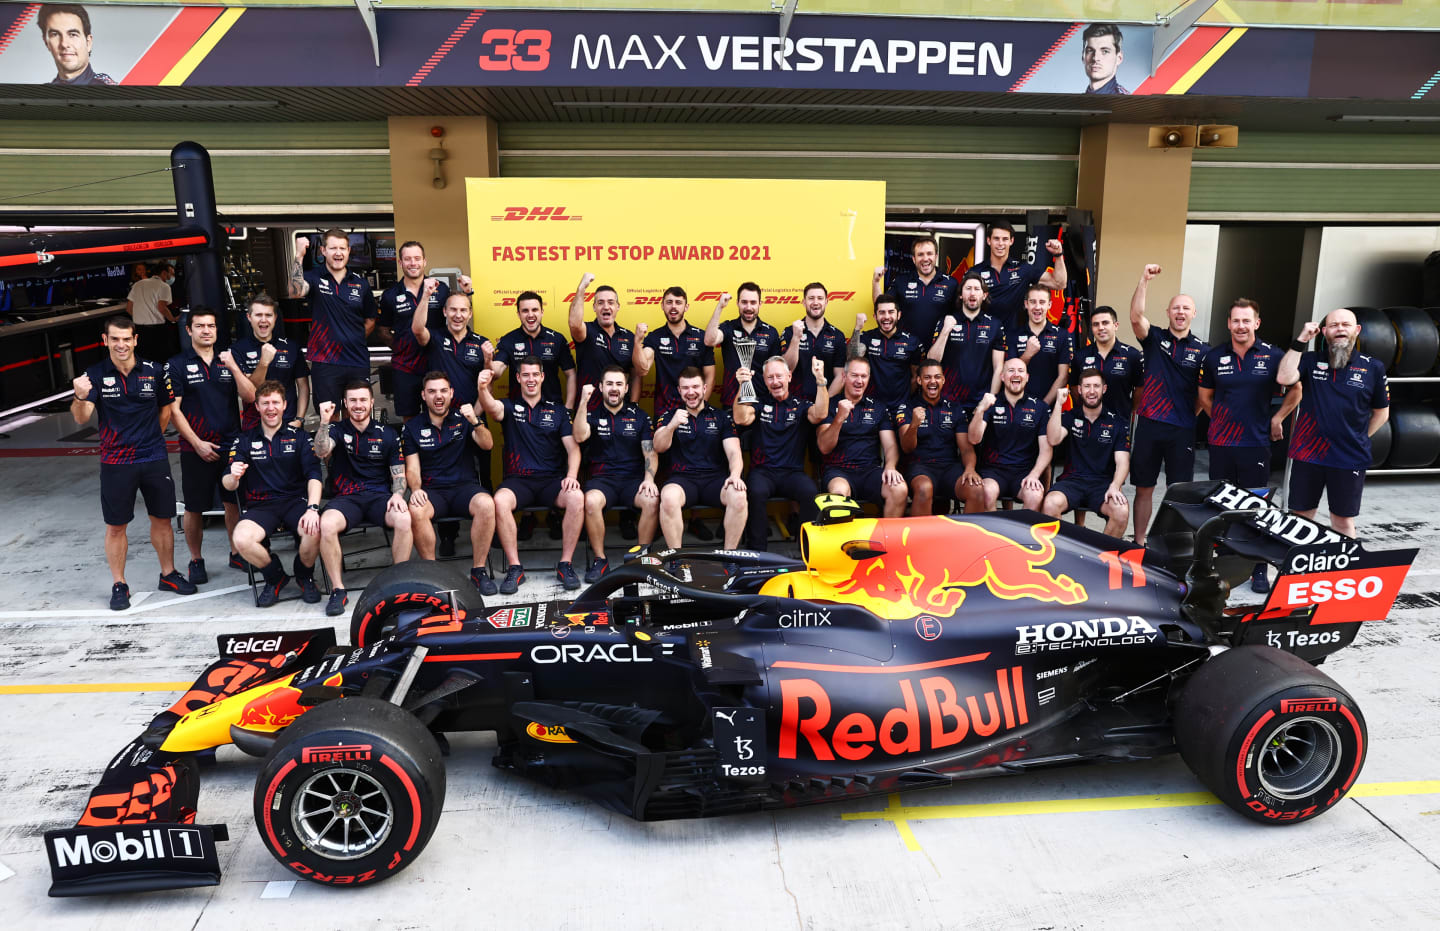 ABU DHABI, UNITED ARAB EMIRATES - DECEMBER 12: The Red Bull Racing team celebrate being awarded the